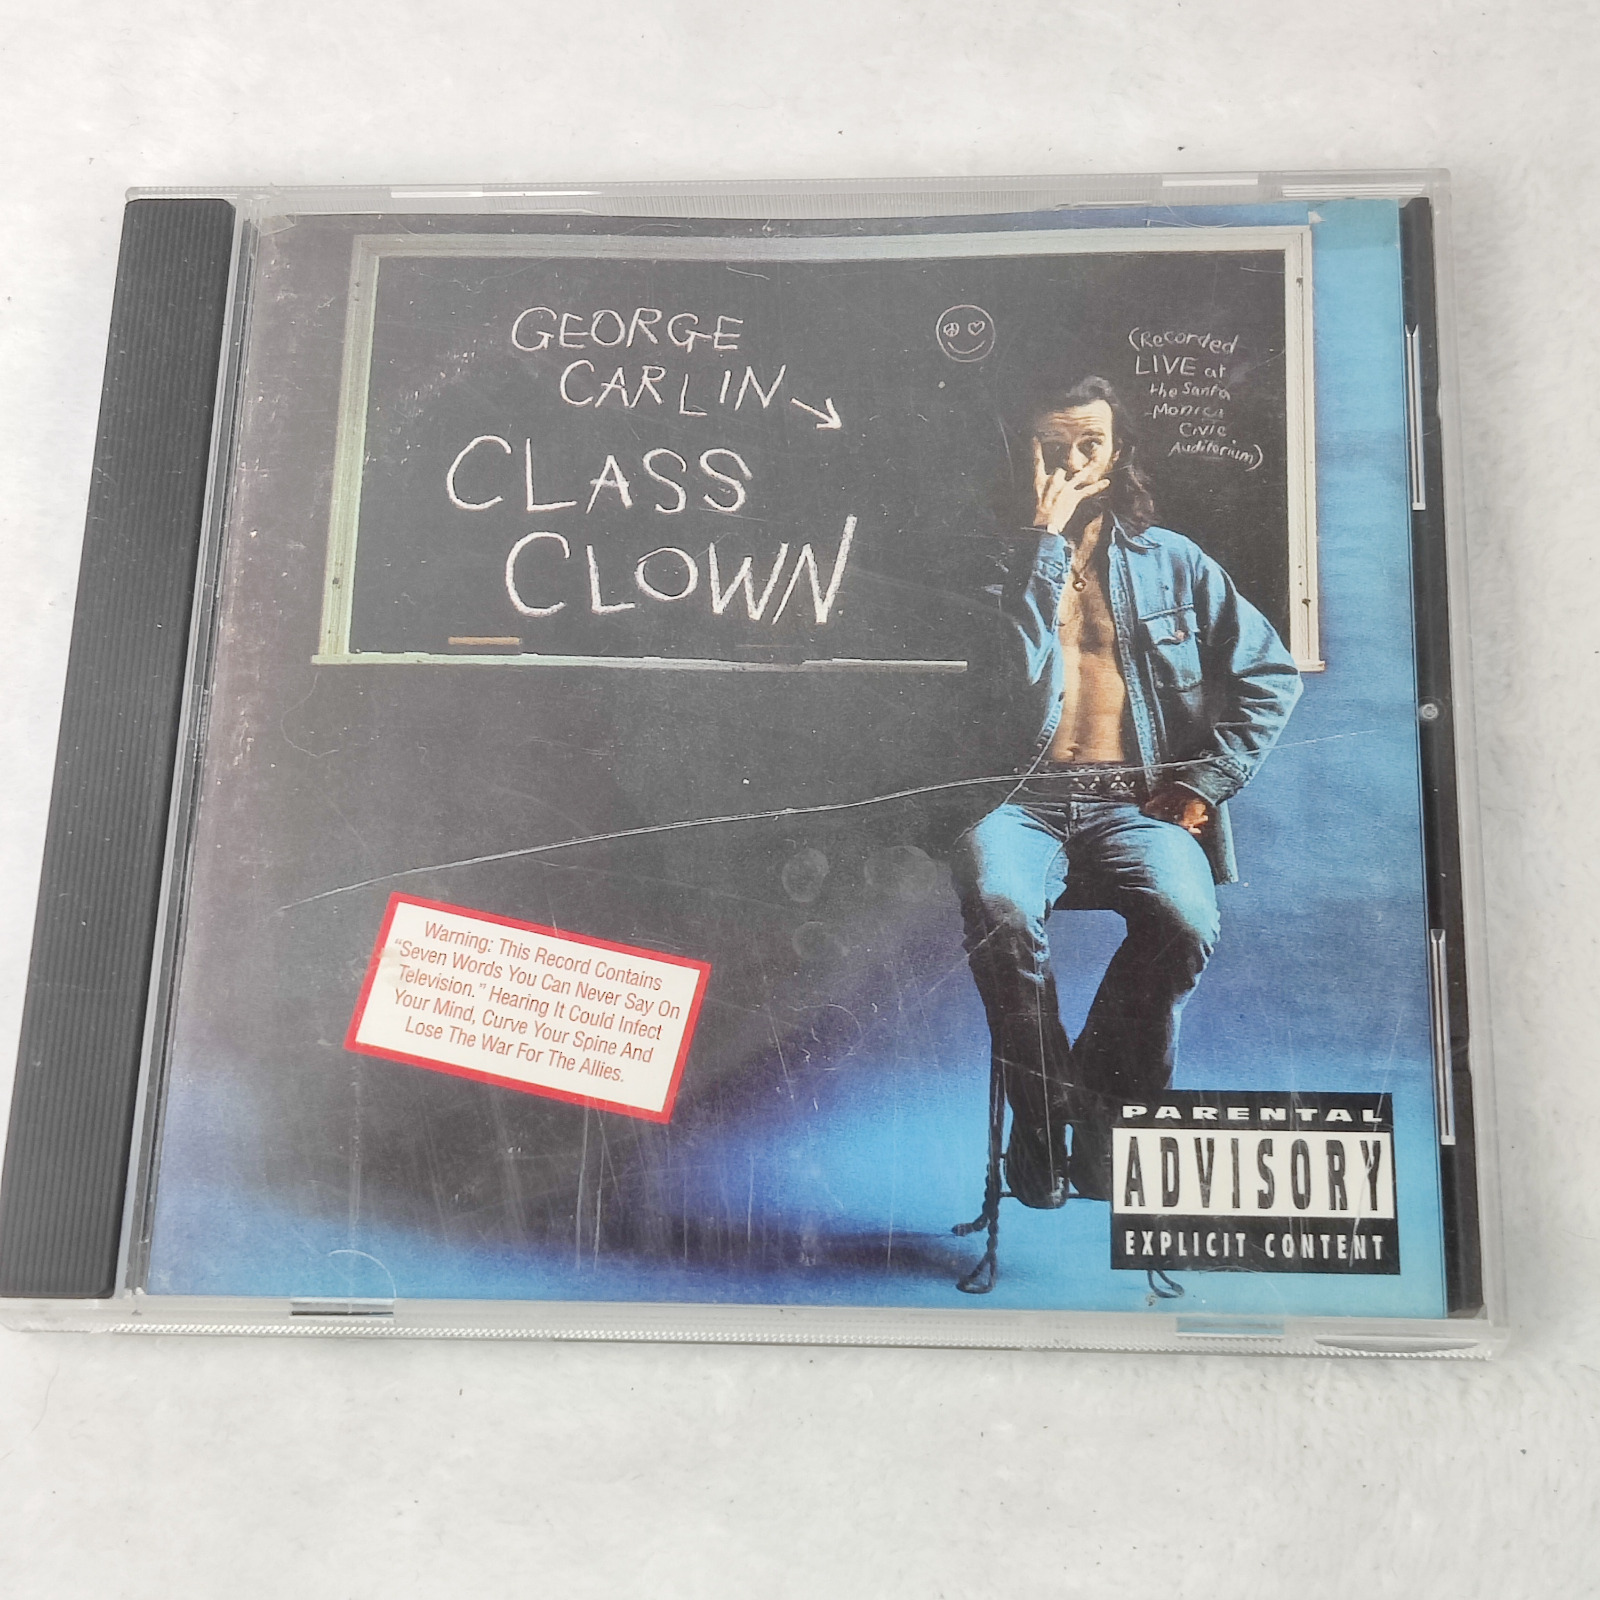 george carlin clown class cd comedy recording 2000 reissued